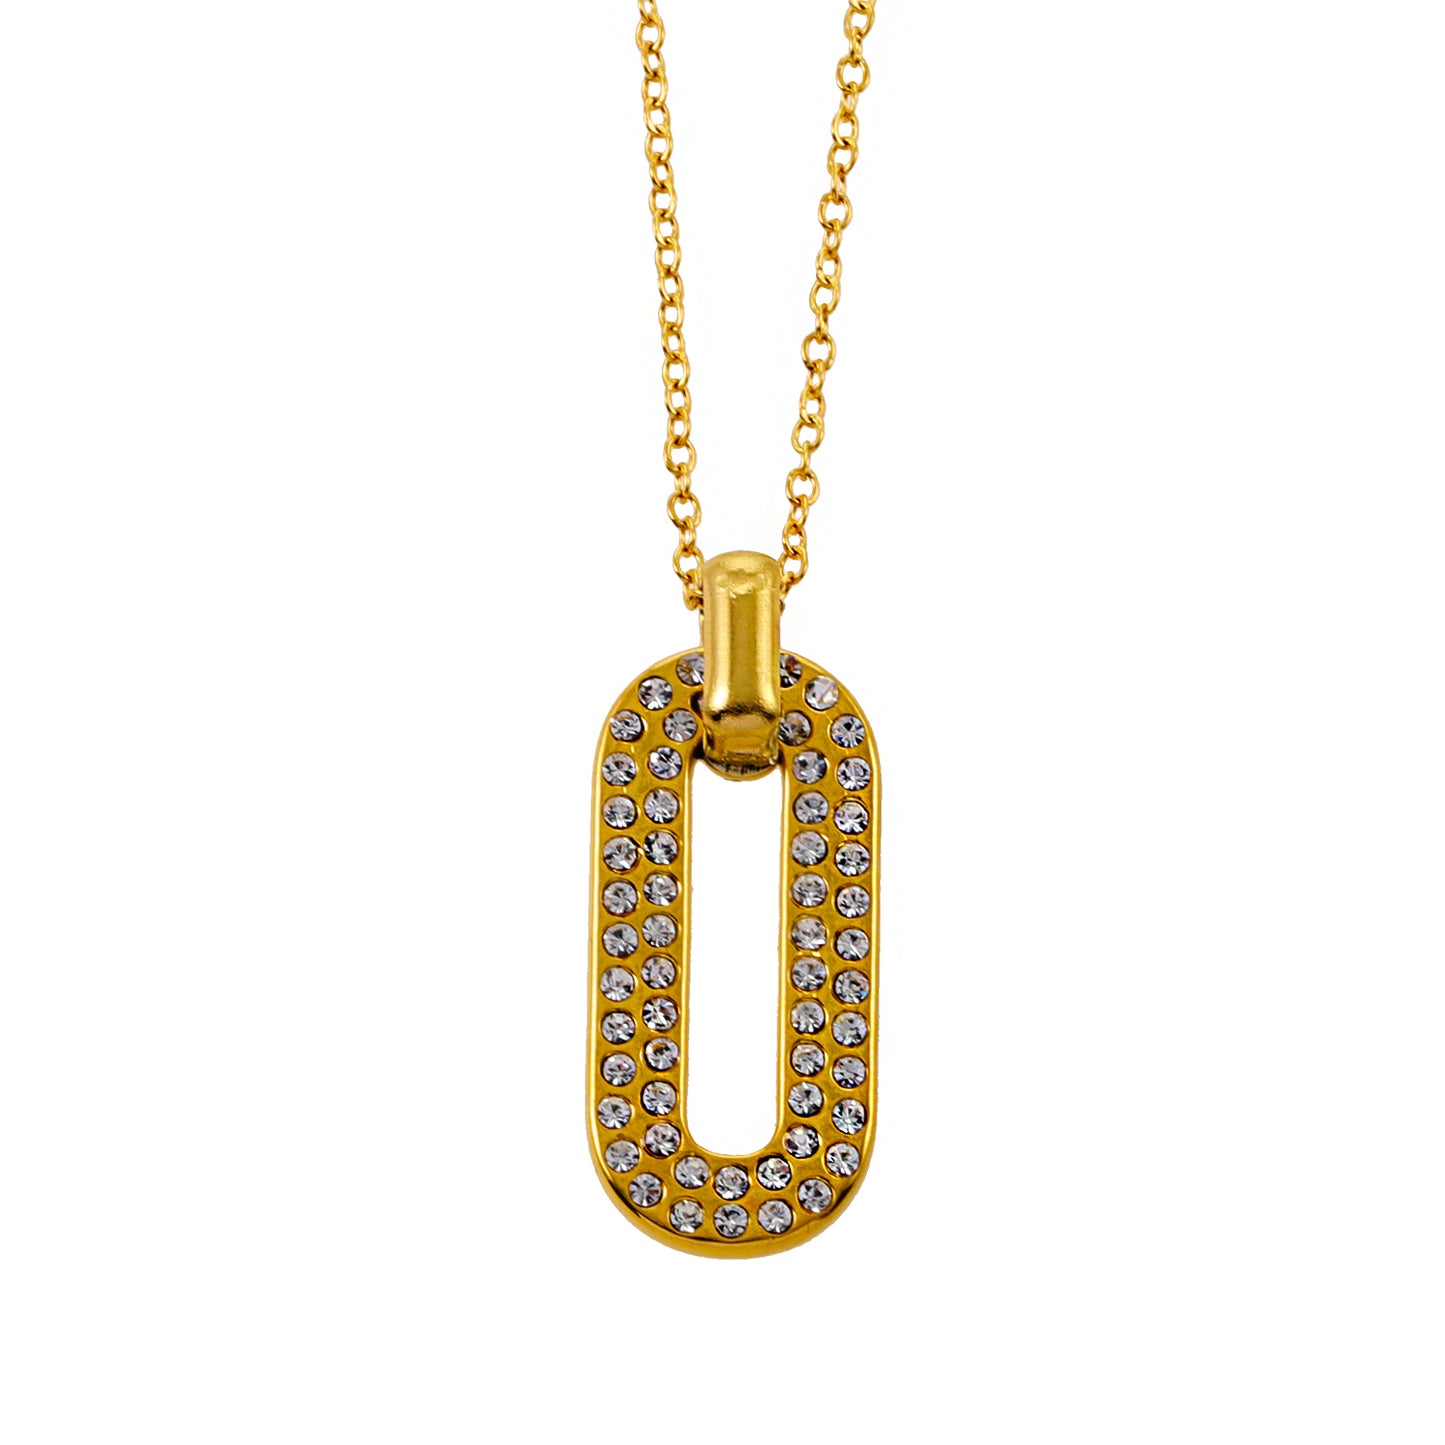 Style ASKIRA 05984: Twisted Rope Combo Chain with a Zirconia-Adorned Oval Shaped Pendant.